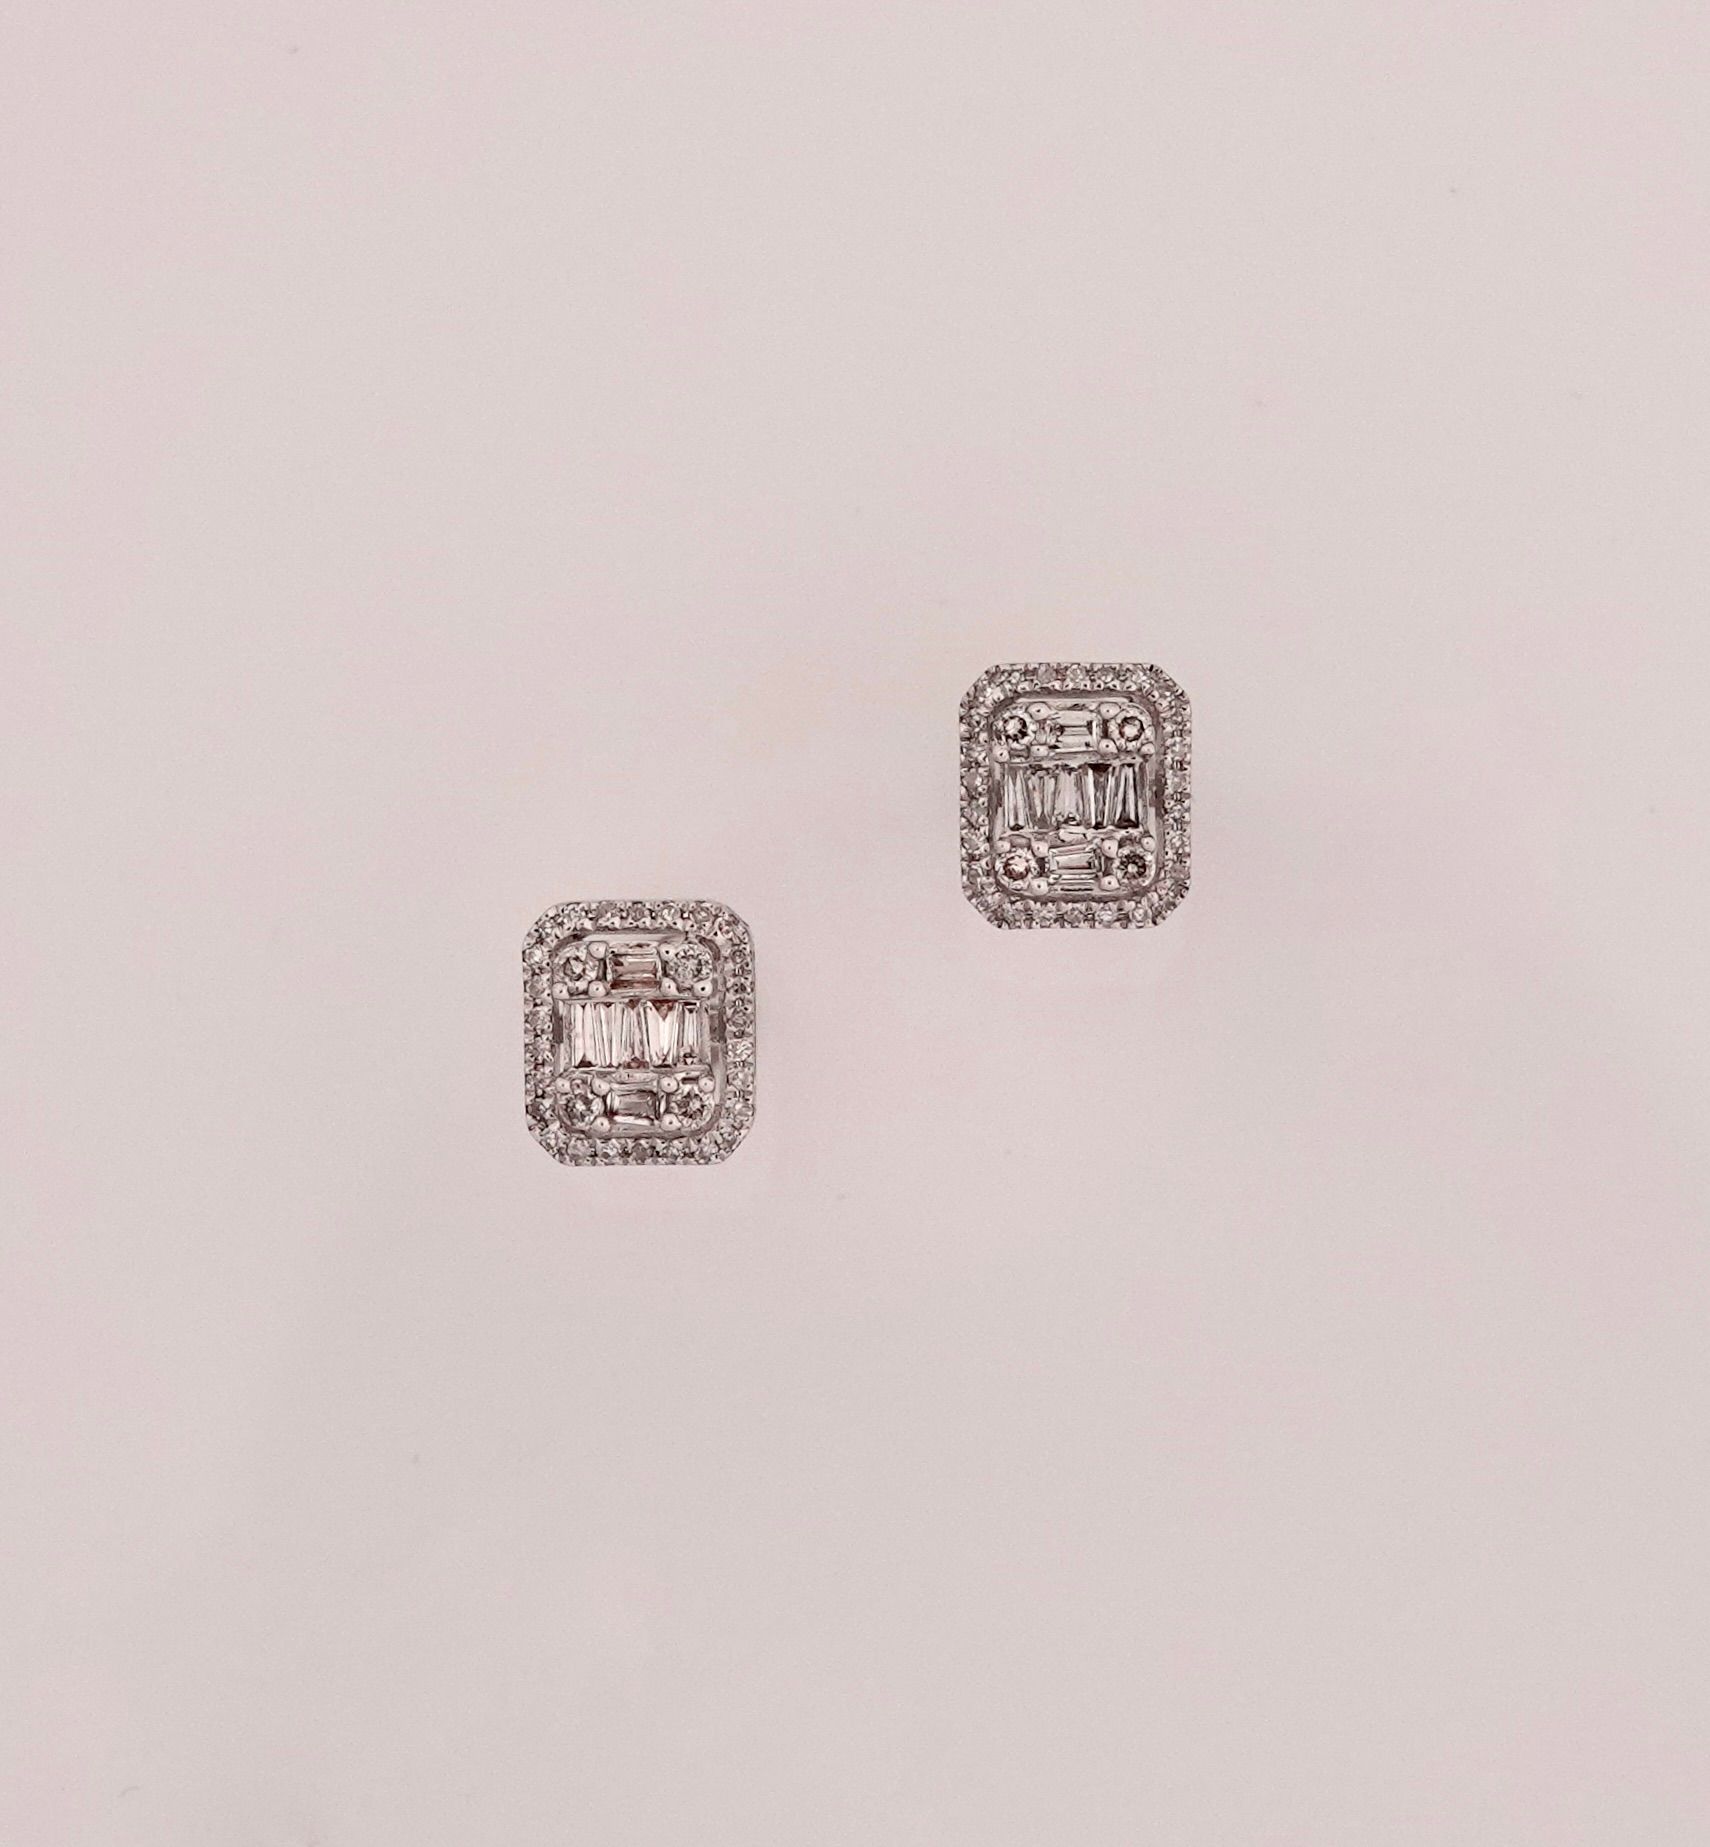 Null Rectangular earrings in white gold, 750 MM, set with baguette-cut diamonds &hellip;